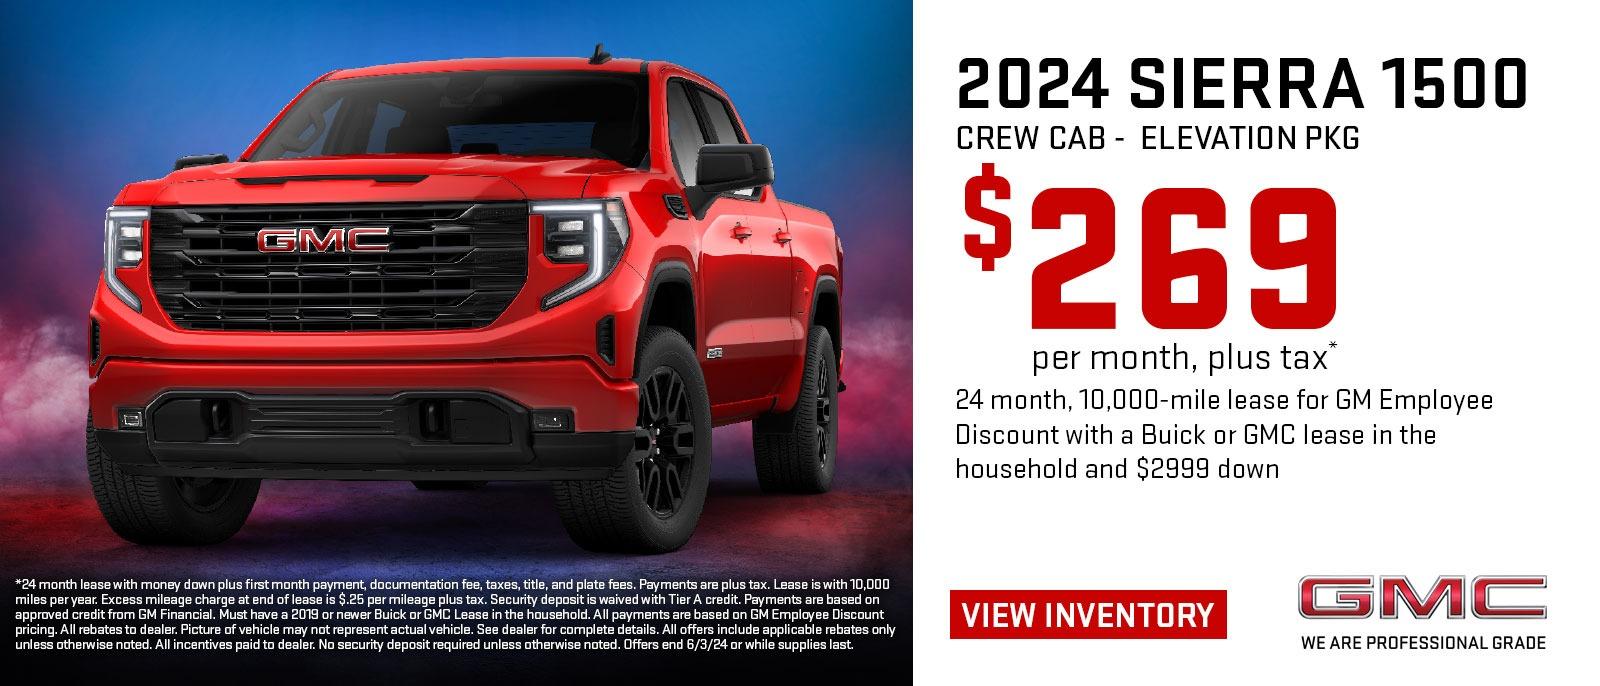 2024 Sierra 1500 Crew Cab - Elevation PKG
$269 per month, plus tax*
24 months, 10,000-mile lease for GM Employee Discount with a Buick or GMC lease in the household and $2999 down